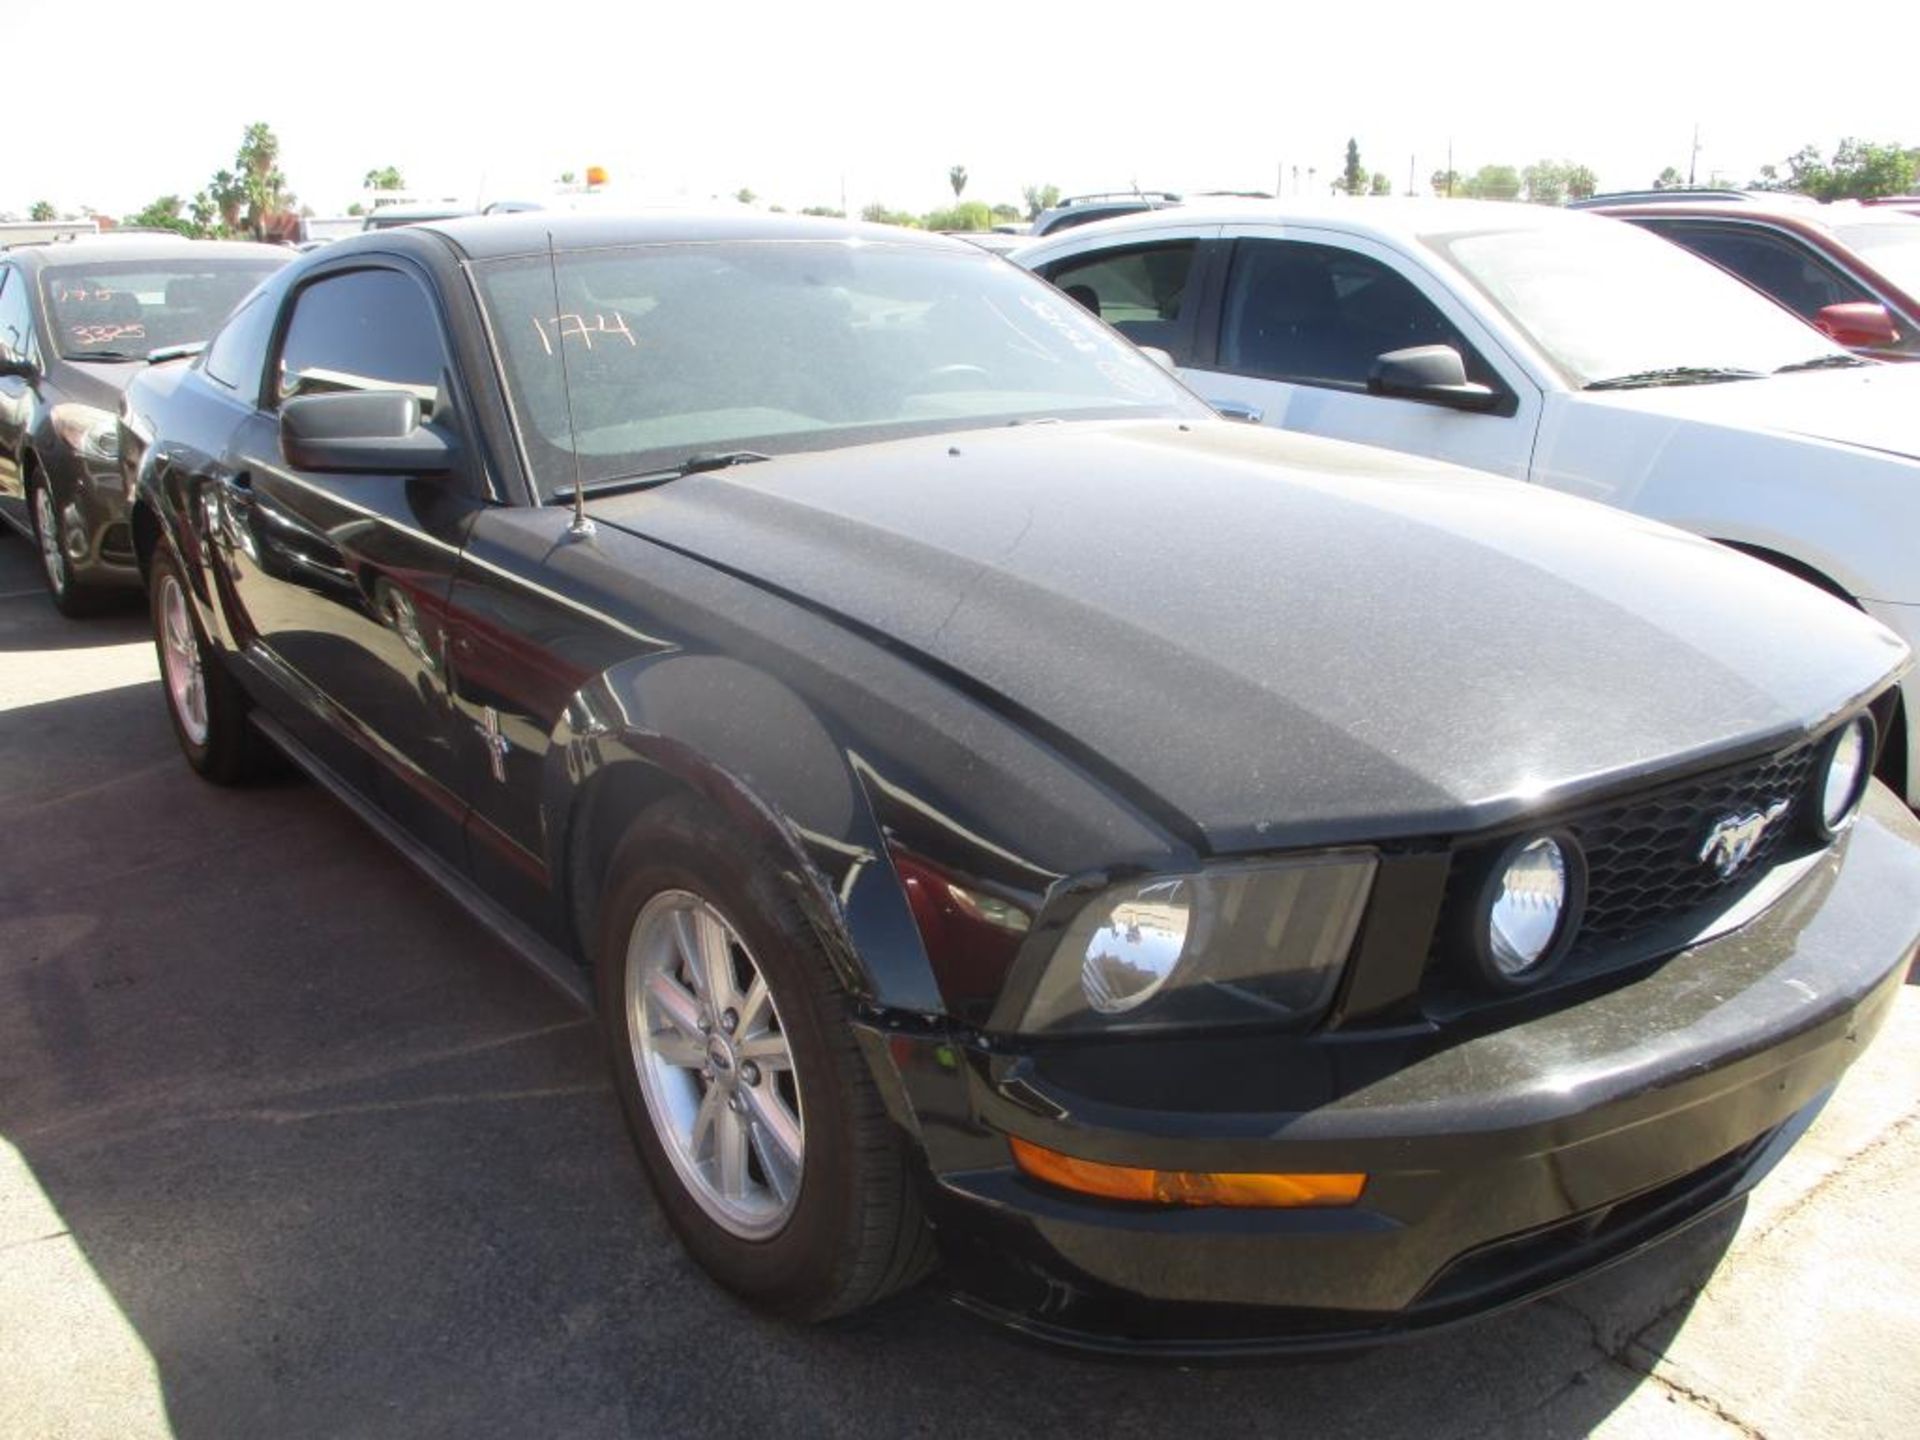 (Lot # 3322) 2007 Ford Mustang - Image 5 of 11